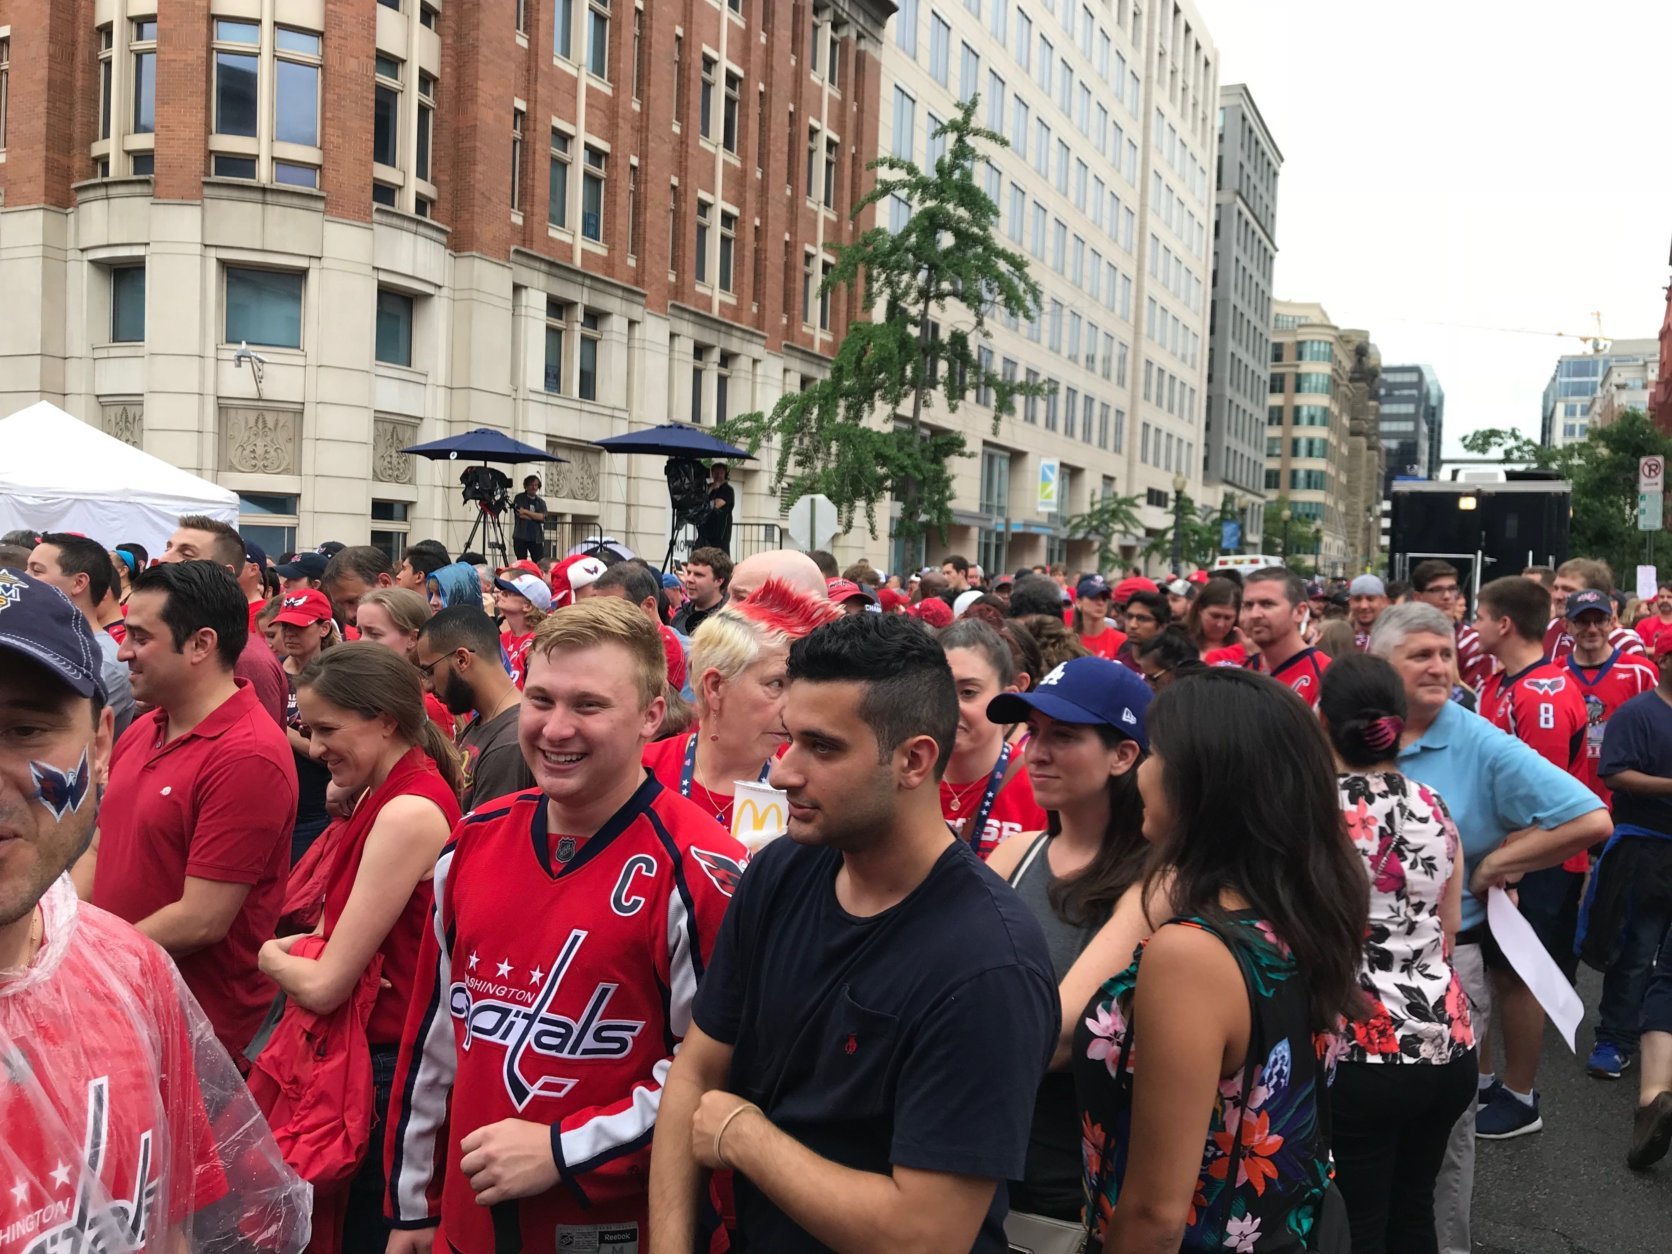 Fan say they are psyched for what is one of the greatest hockey game to be played in D.C. (WTOP/Dick Uliano)